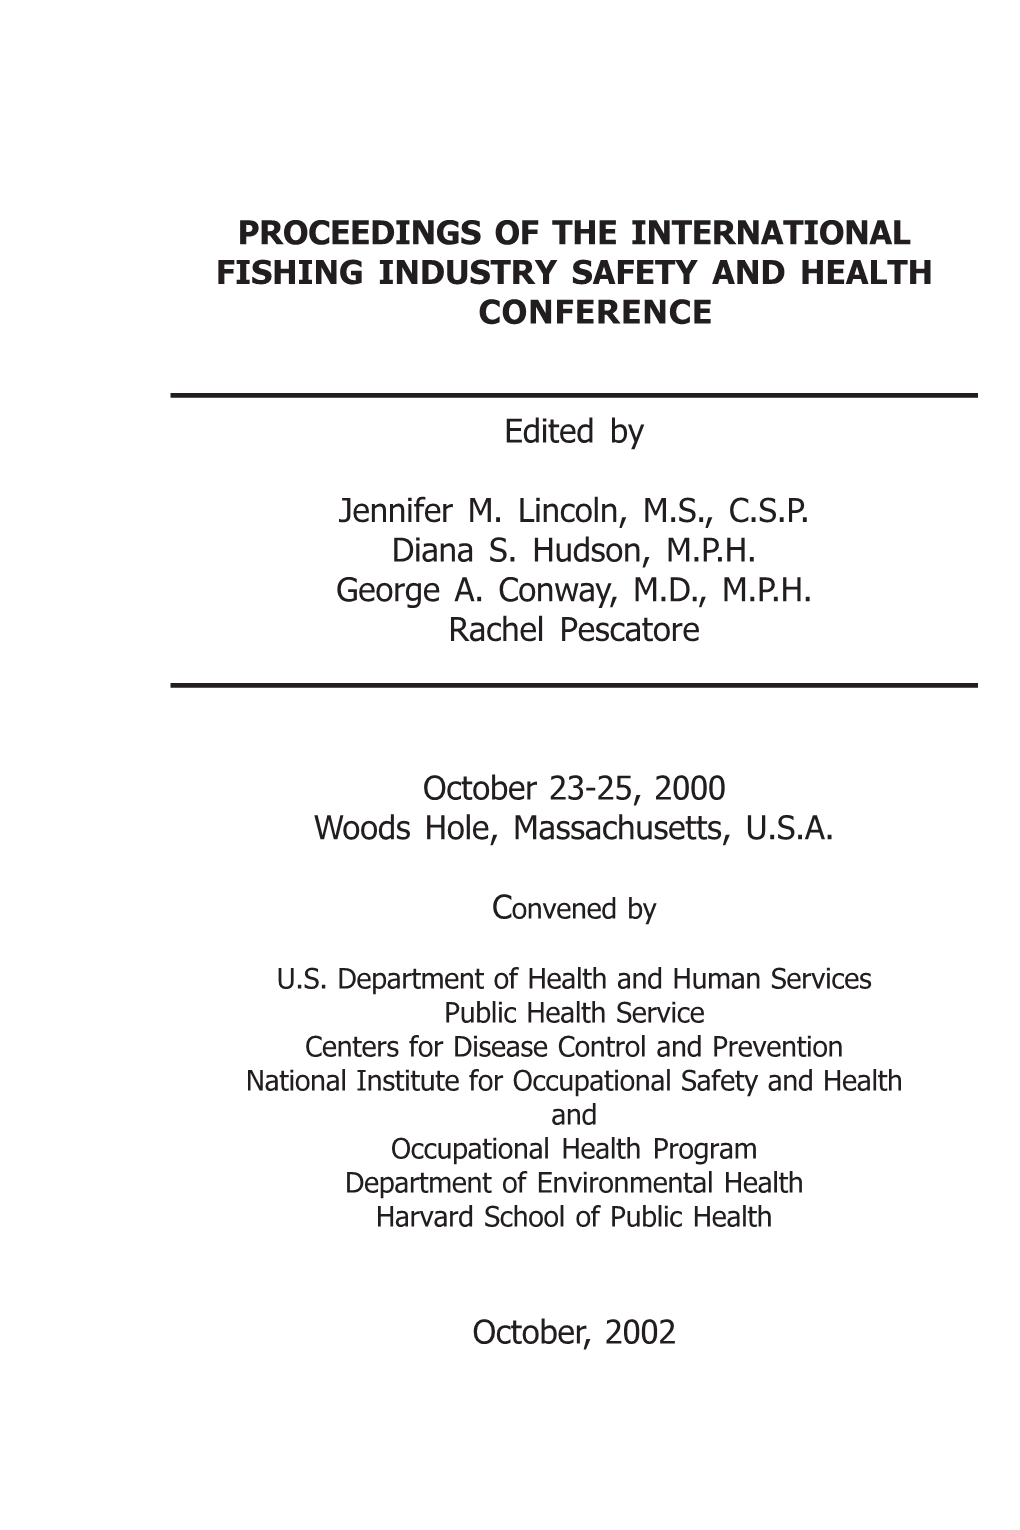 International Fishing Industry Safety and Health (IFISH) Conference